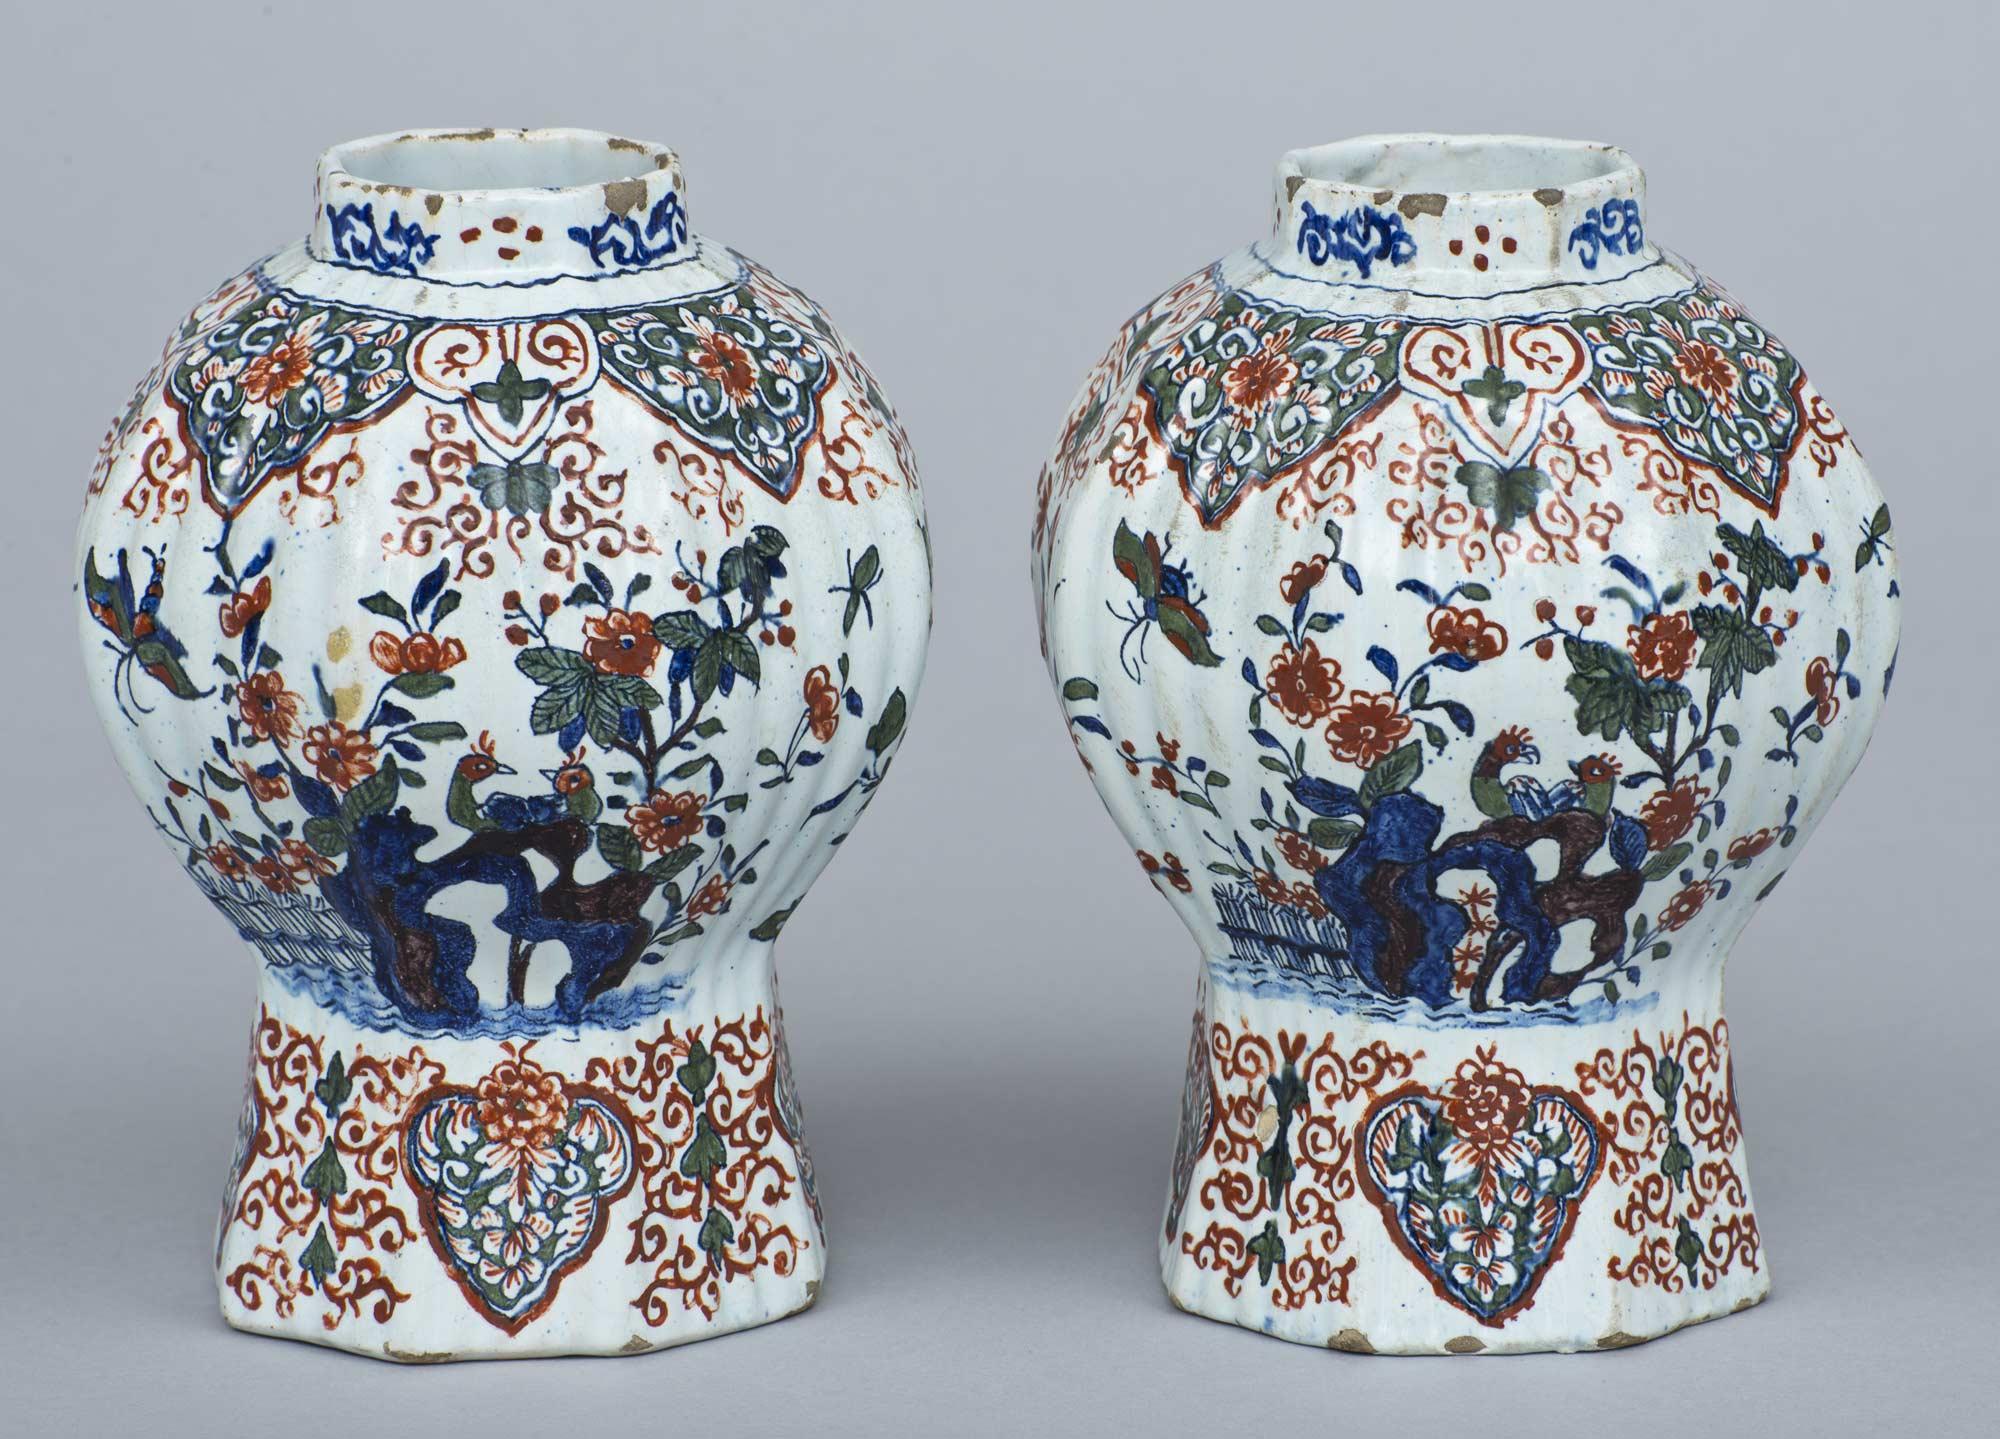 Pair of Dutch Delft Vases, 17th Century In Good Condition For Sale In Sheffield, MA